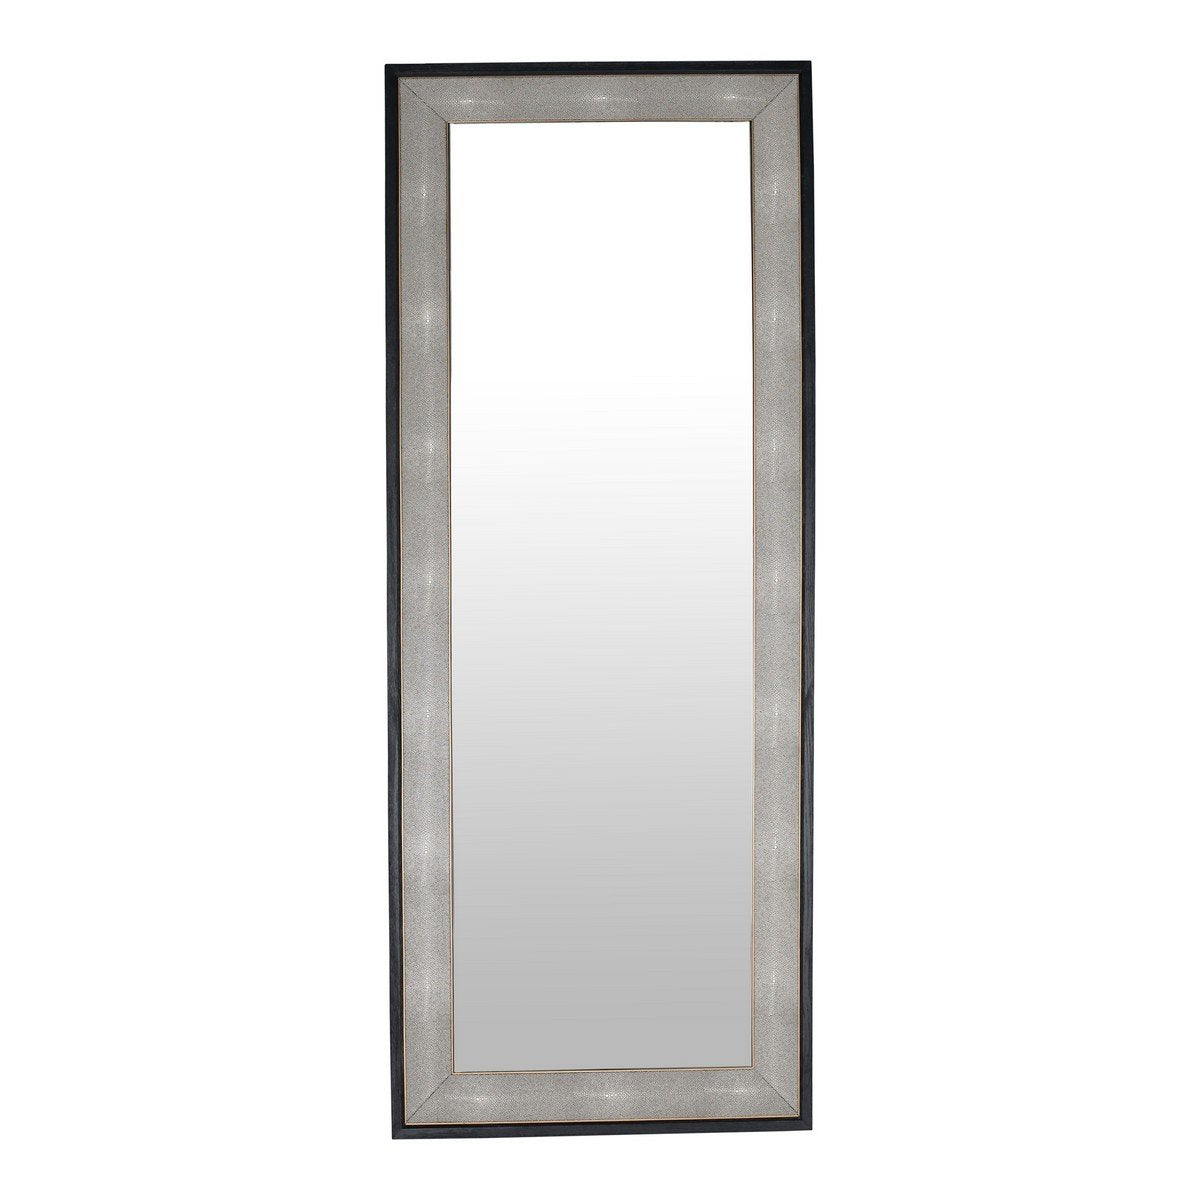 Moe's Home Collection Mako Mirror - VL-1050-15 - Moe's Home Collection - Mirrors - Minimal And Modern - 1